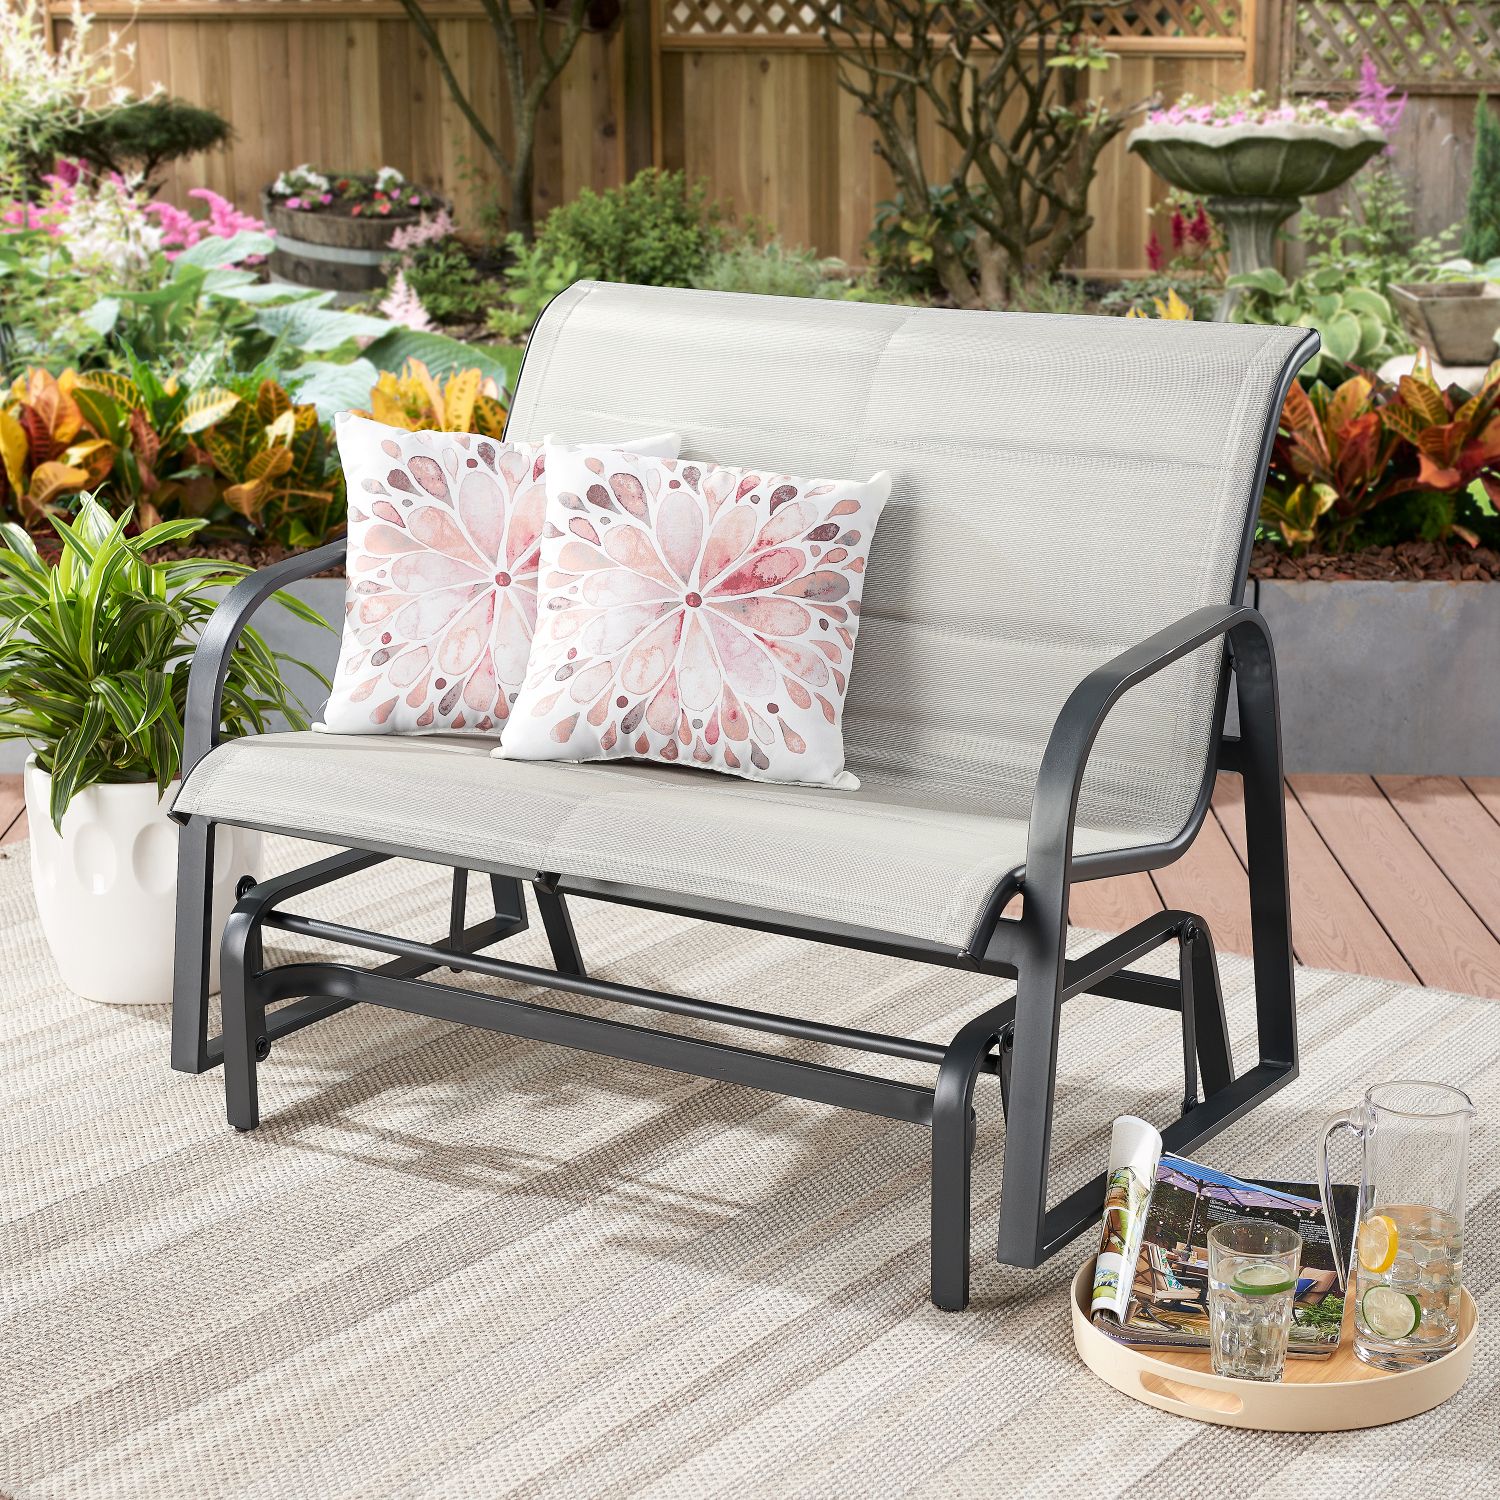 Details About Montrose Padded Sling Glider Bench Outdoor Garden Patio Porch  Furniture Chair Regarding Padded Sling Loveseats With Cushions (Photo 14 of 25)